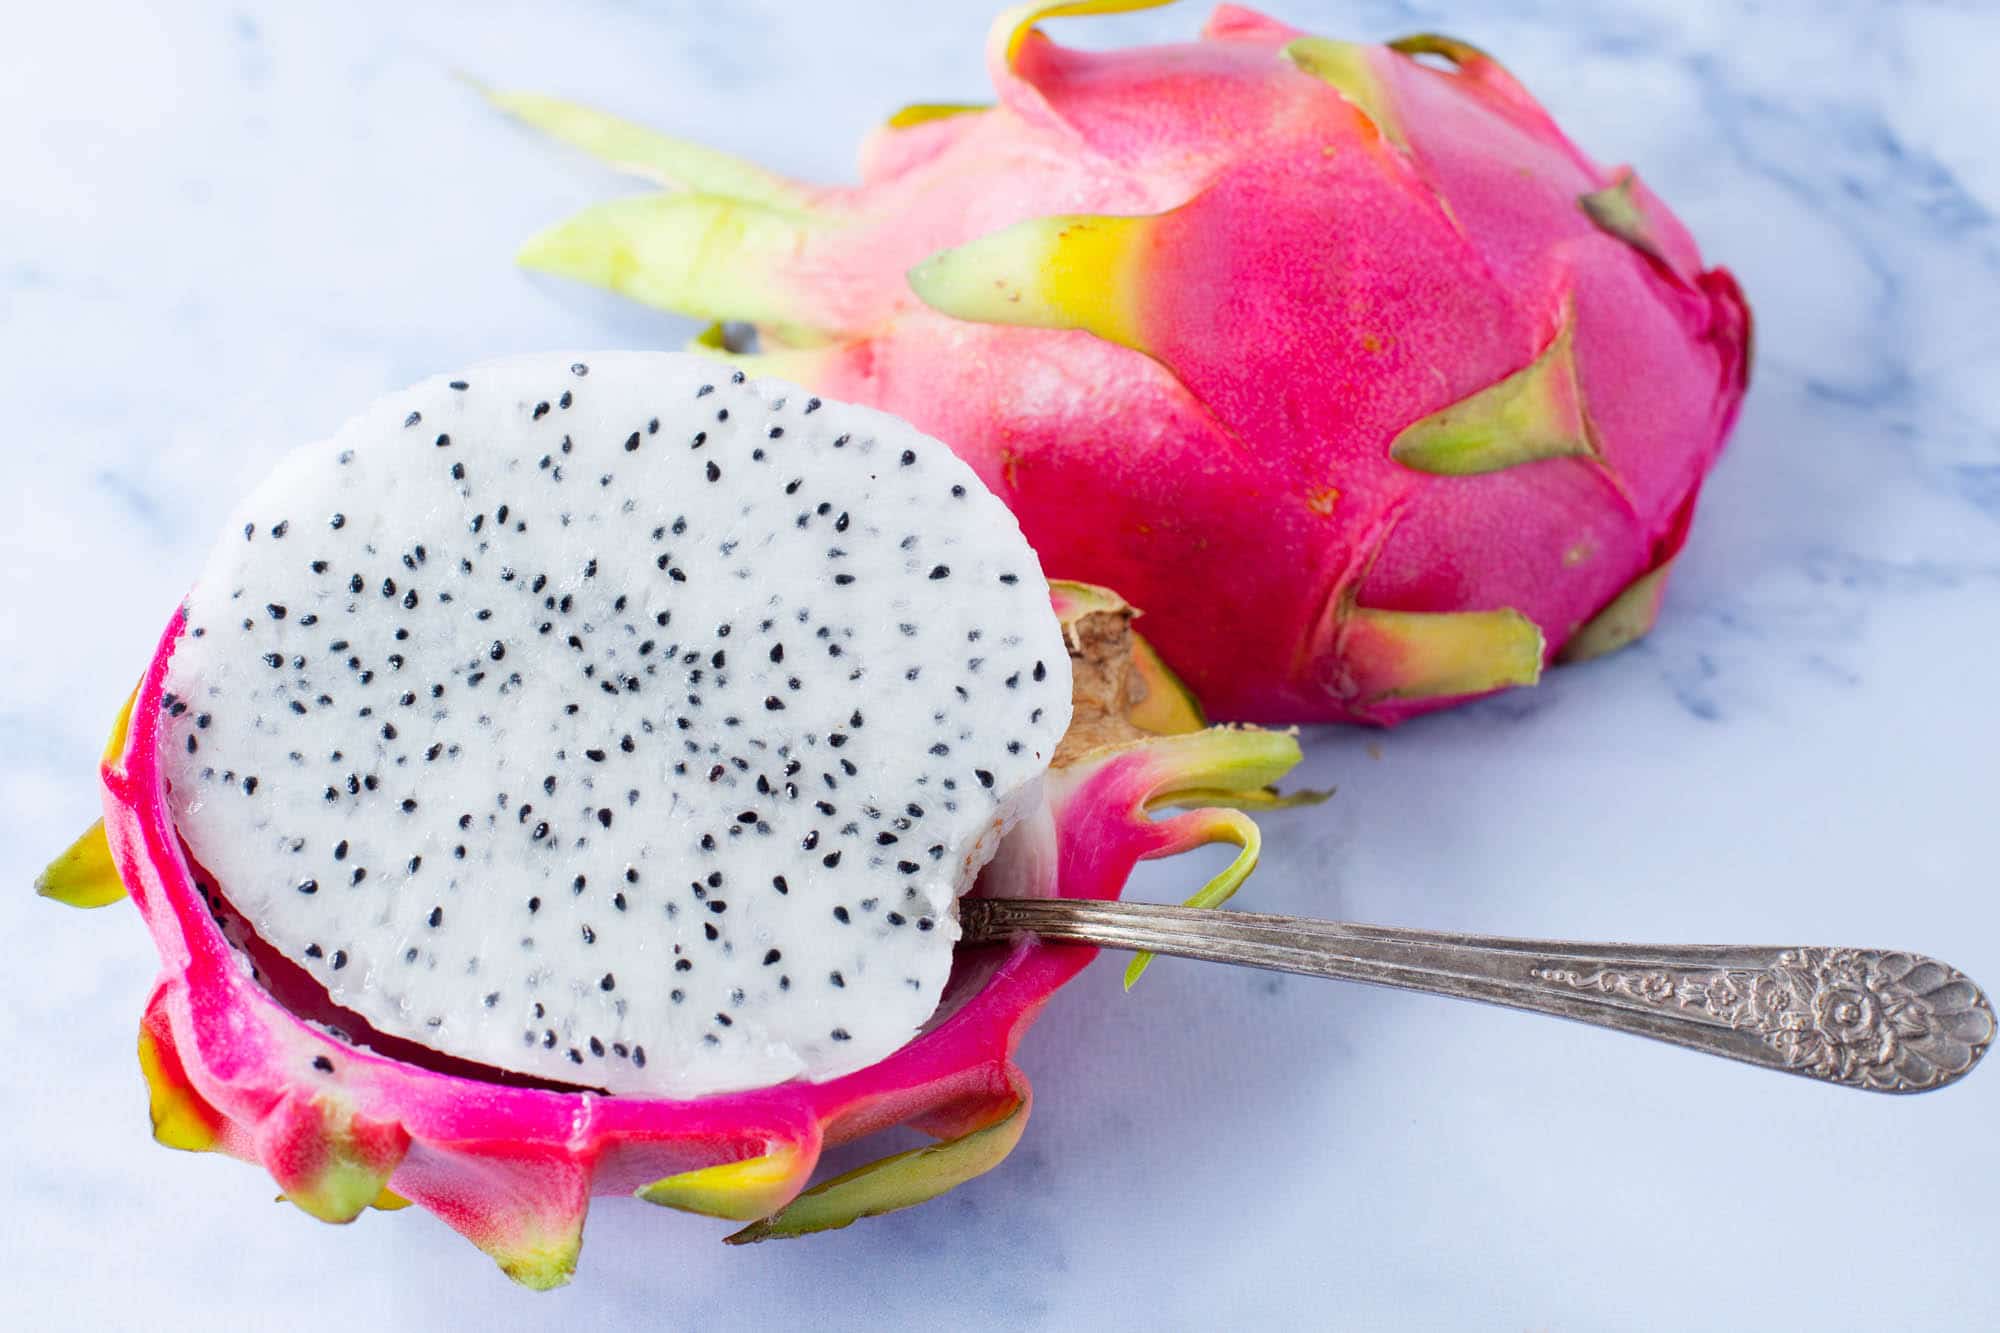 How to eat dragon fruit with a spoon